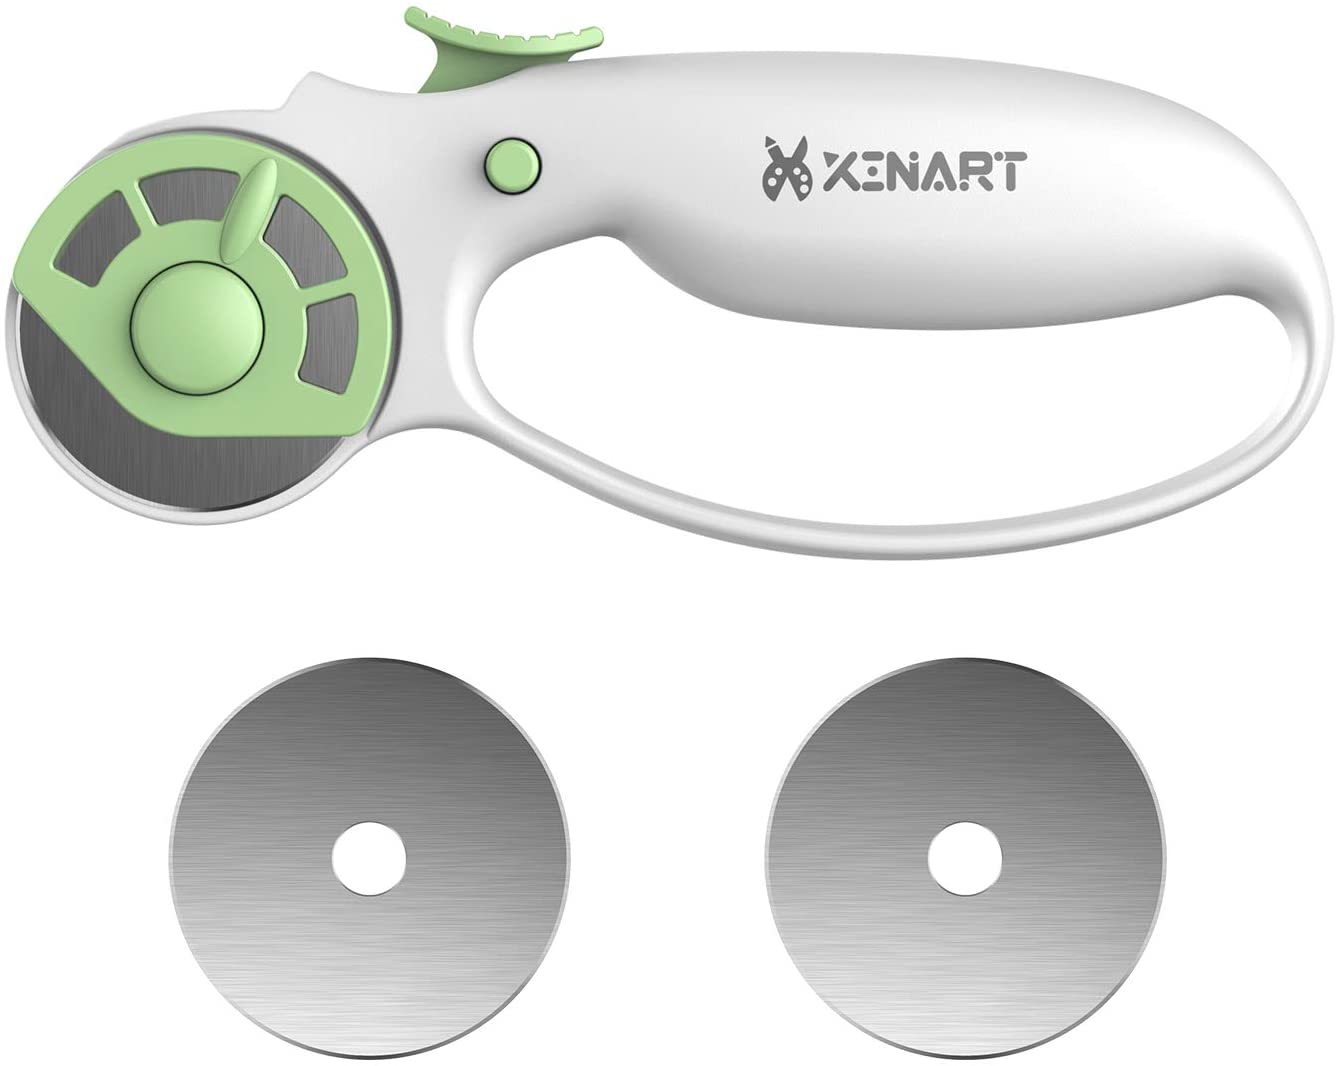 Xinart 45mm Safety Lock Sewing Rotary Cutter